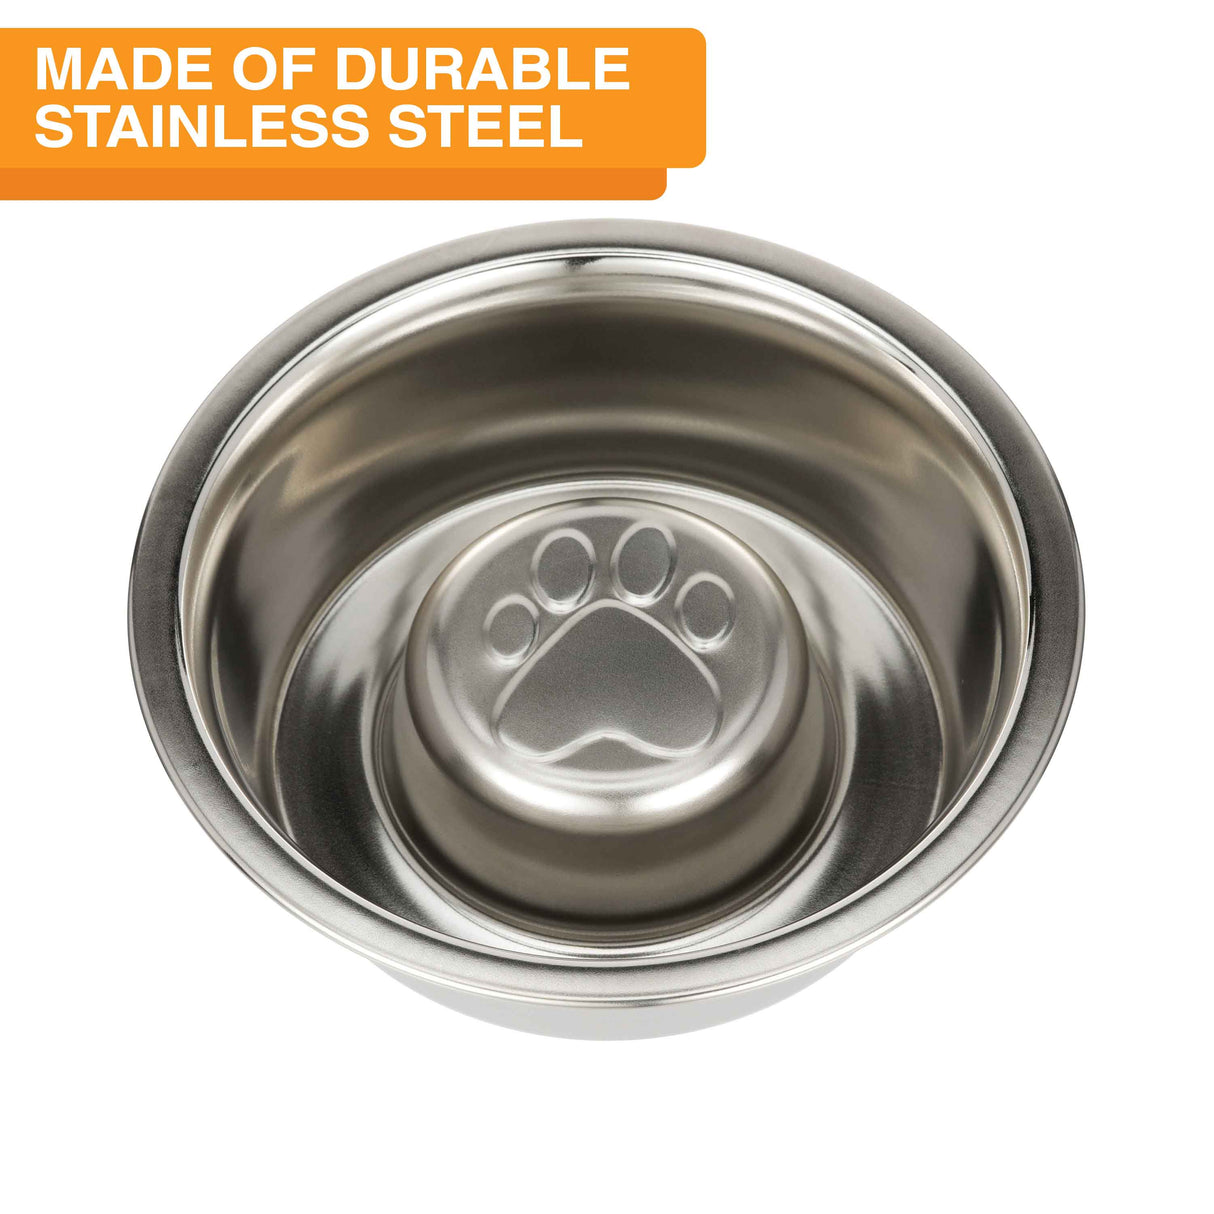 Neater Pets Stainless Steel Hungry Dog Bowl, Grey, 2 Cups, Size: 5.38 Diameter x 1.69 Tall, Gray